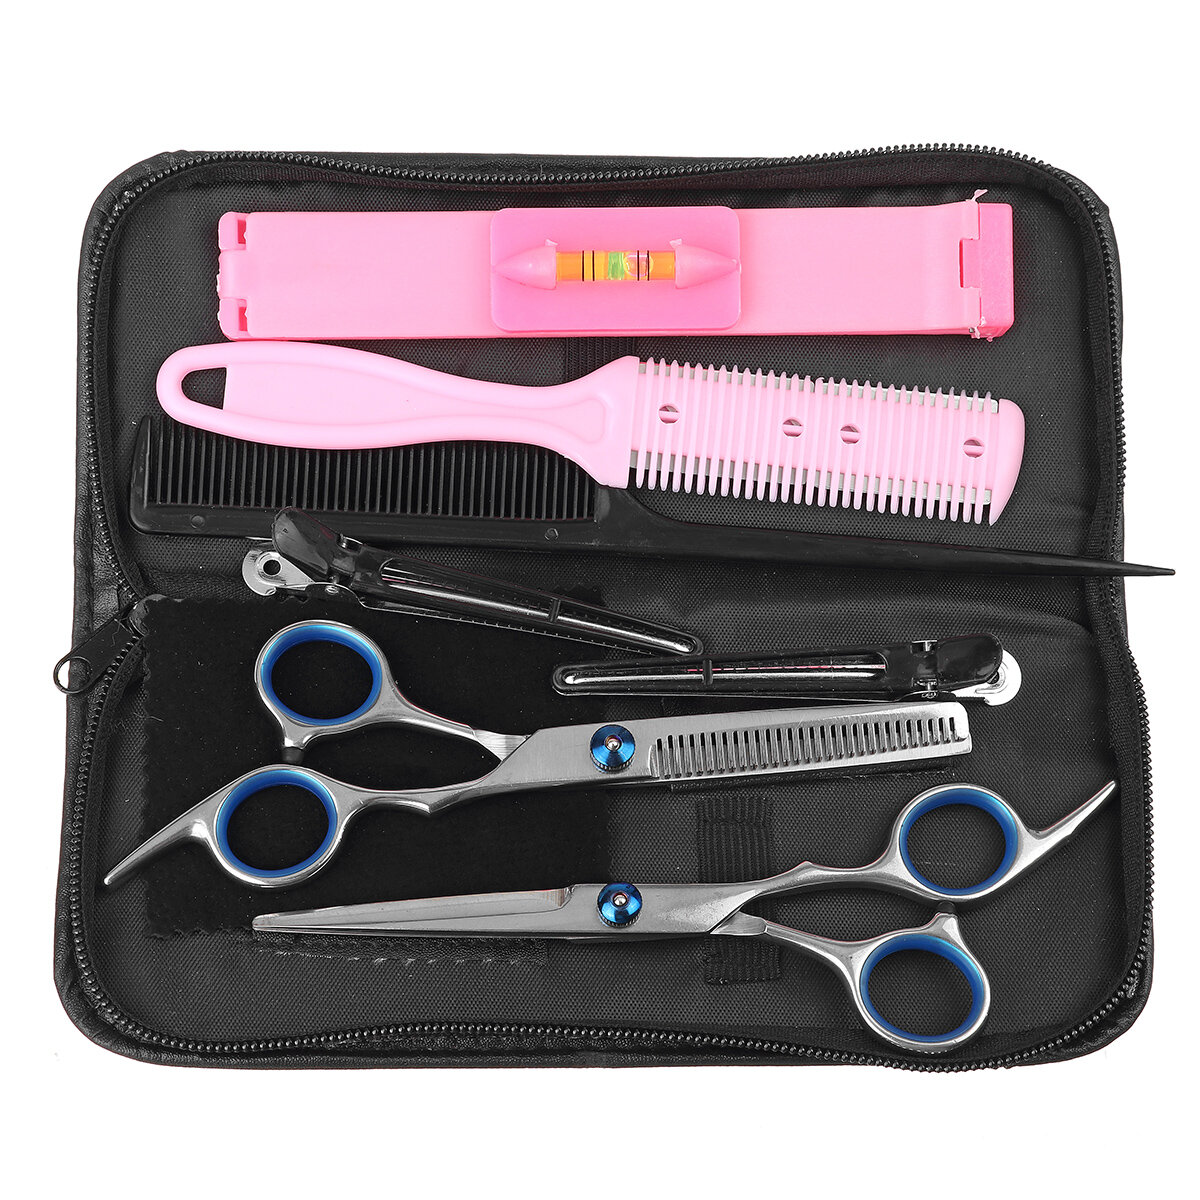 

9pcs Hair Scissors Trimmer Cutting Thinning Shears Comb Clips Scissors Case